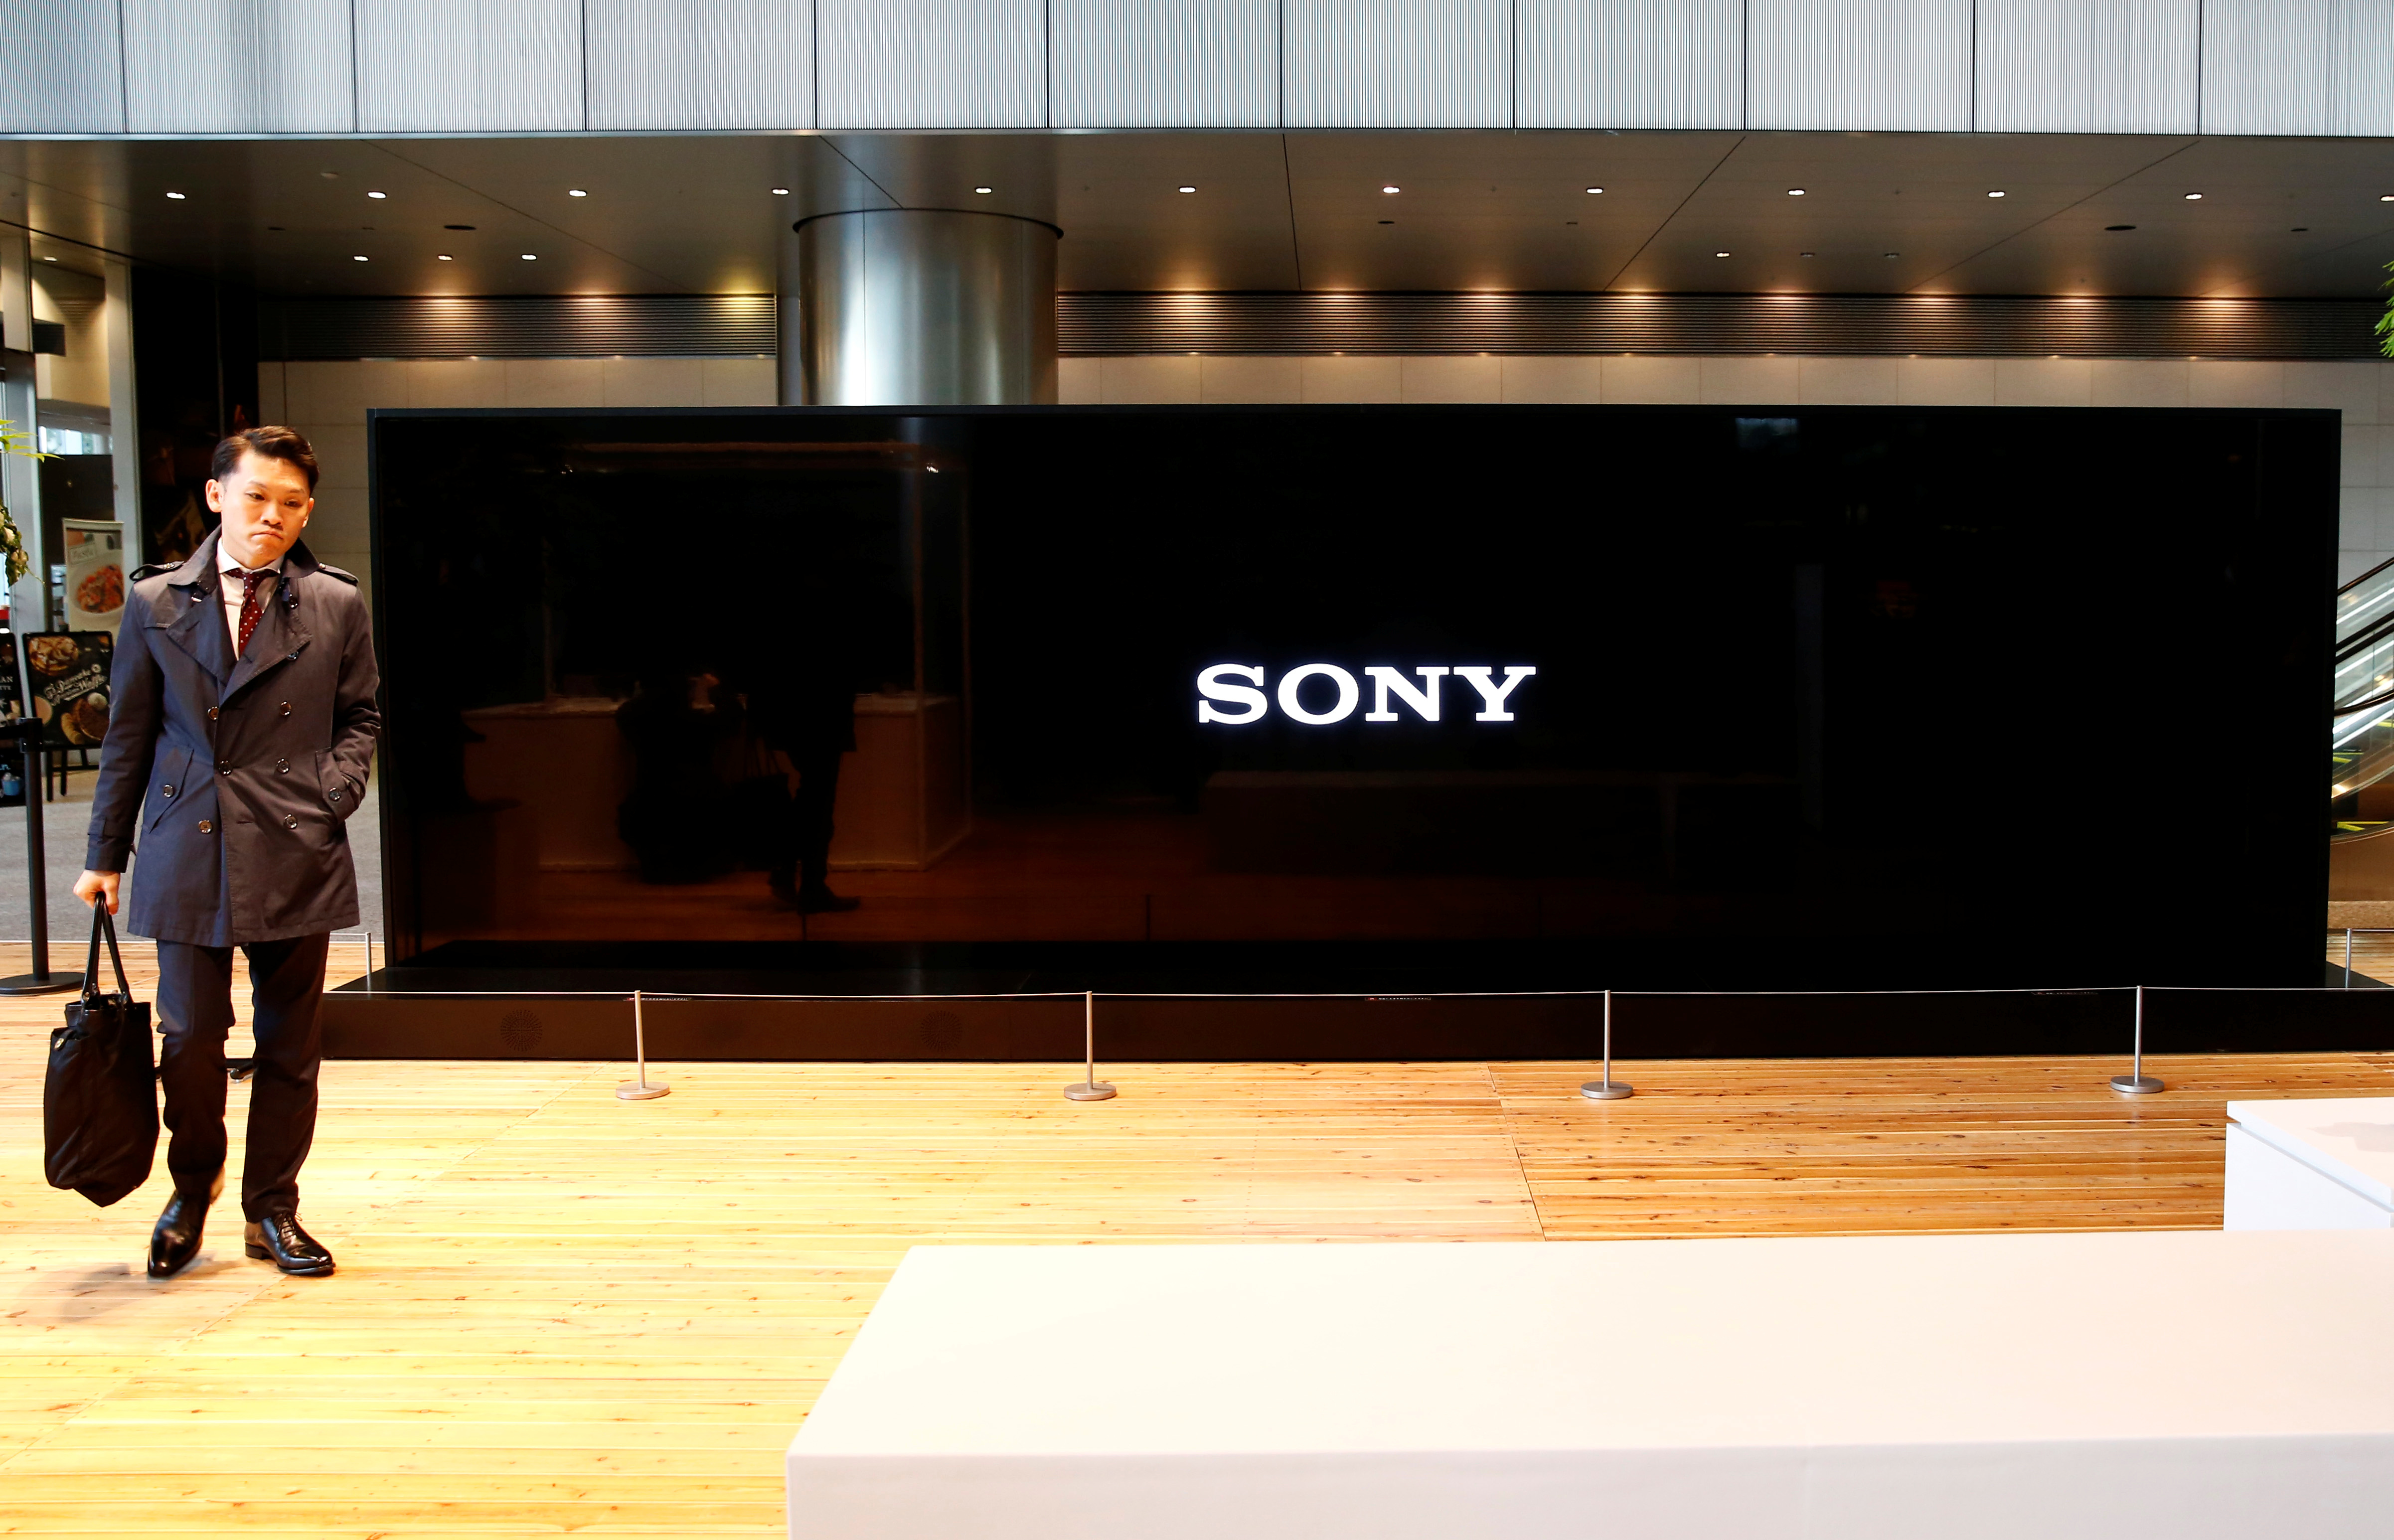 Sony Corp's logo is seen on its Crystal LED Integrated Structure display at its headquarters in Tokyo